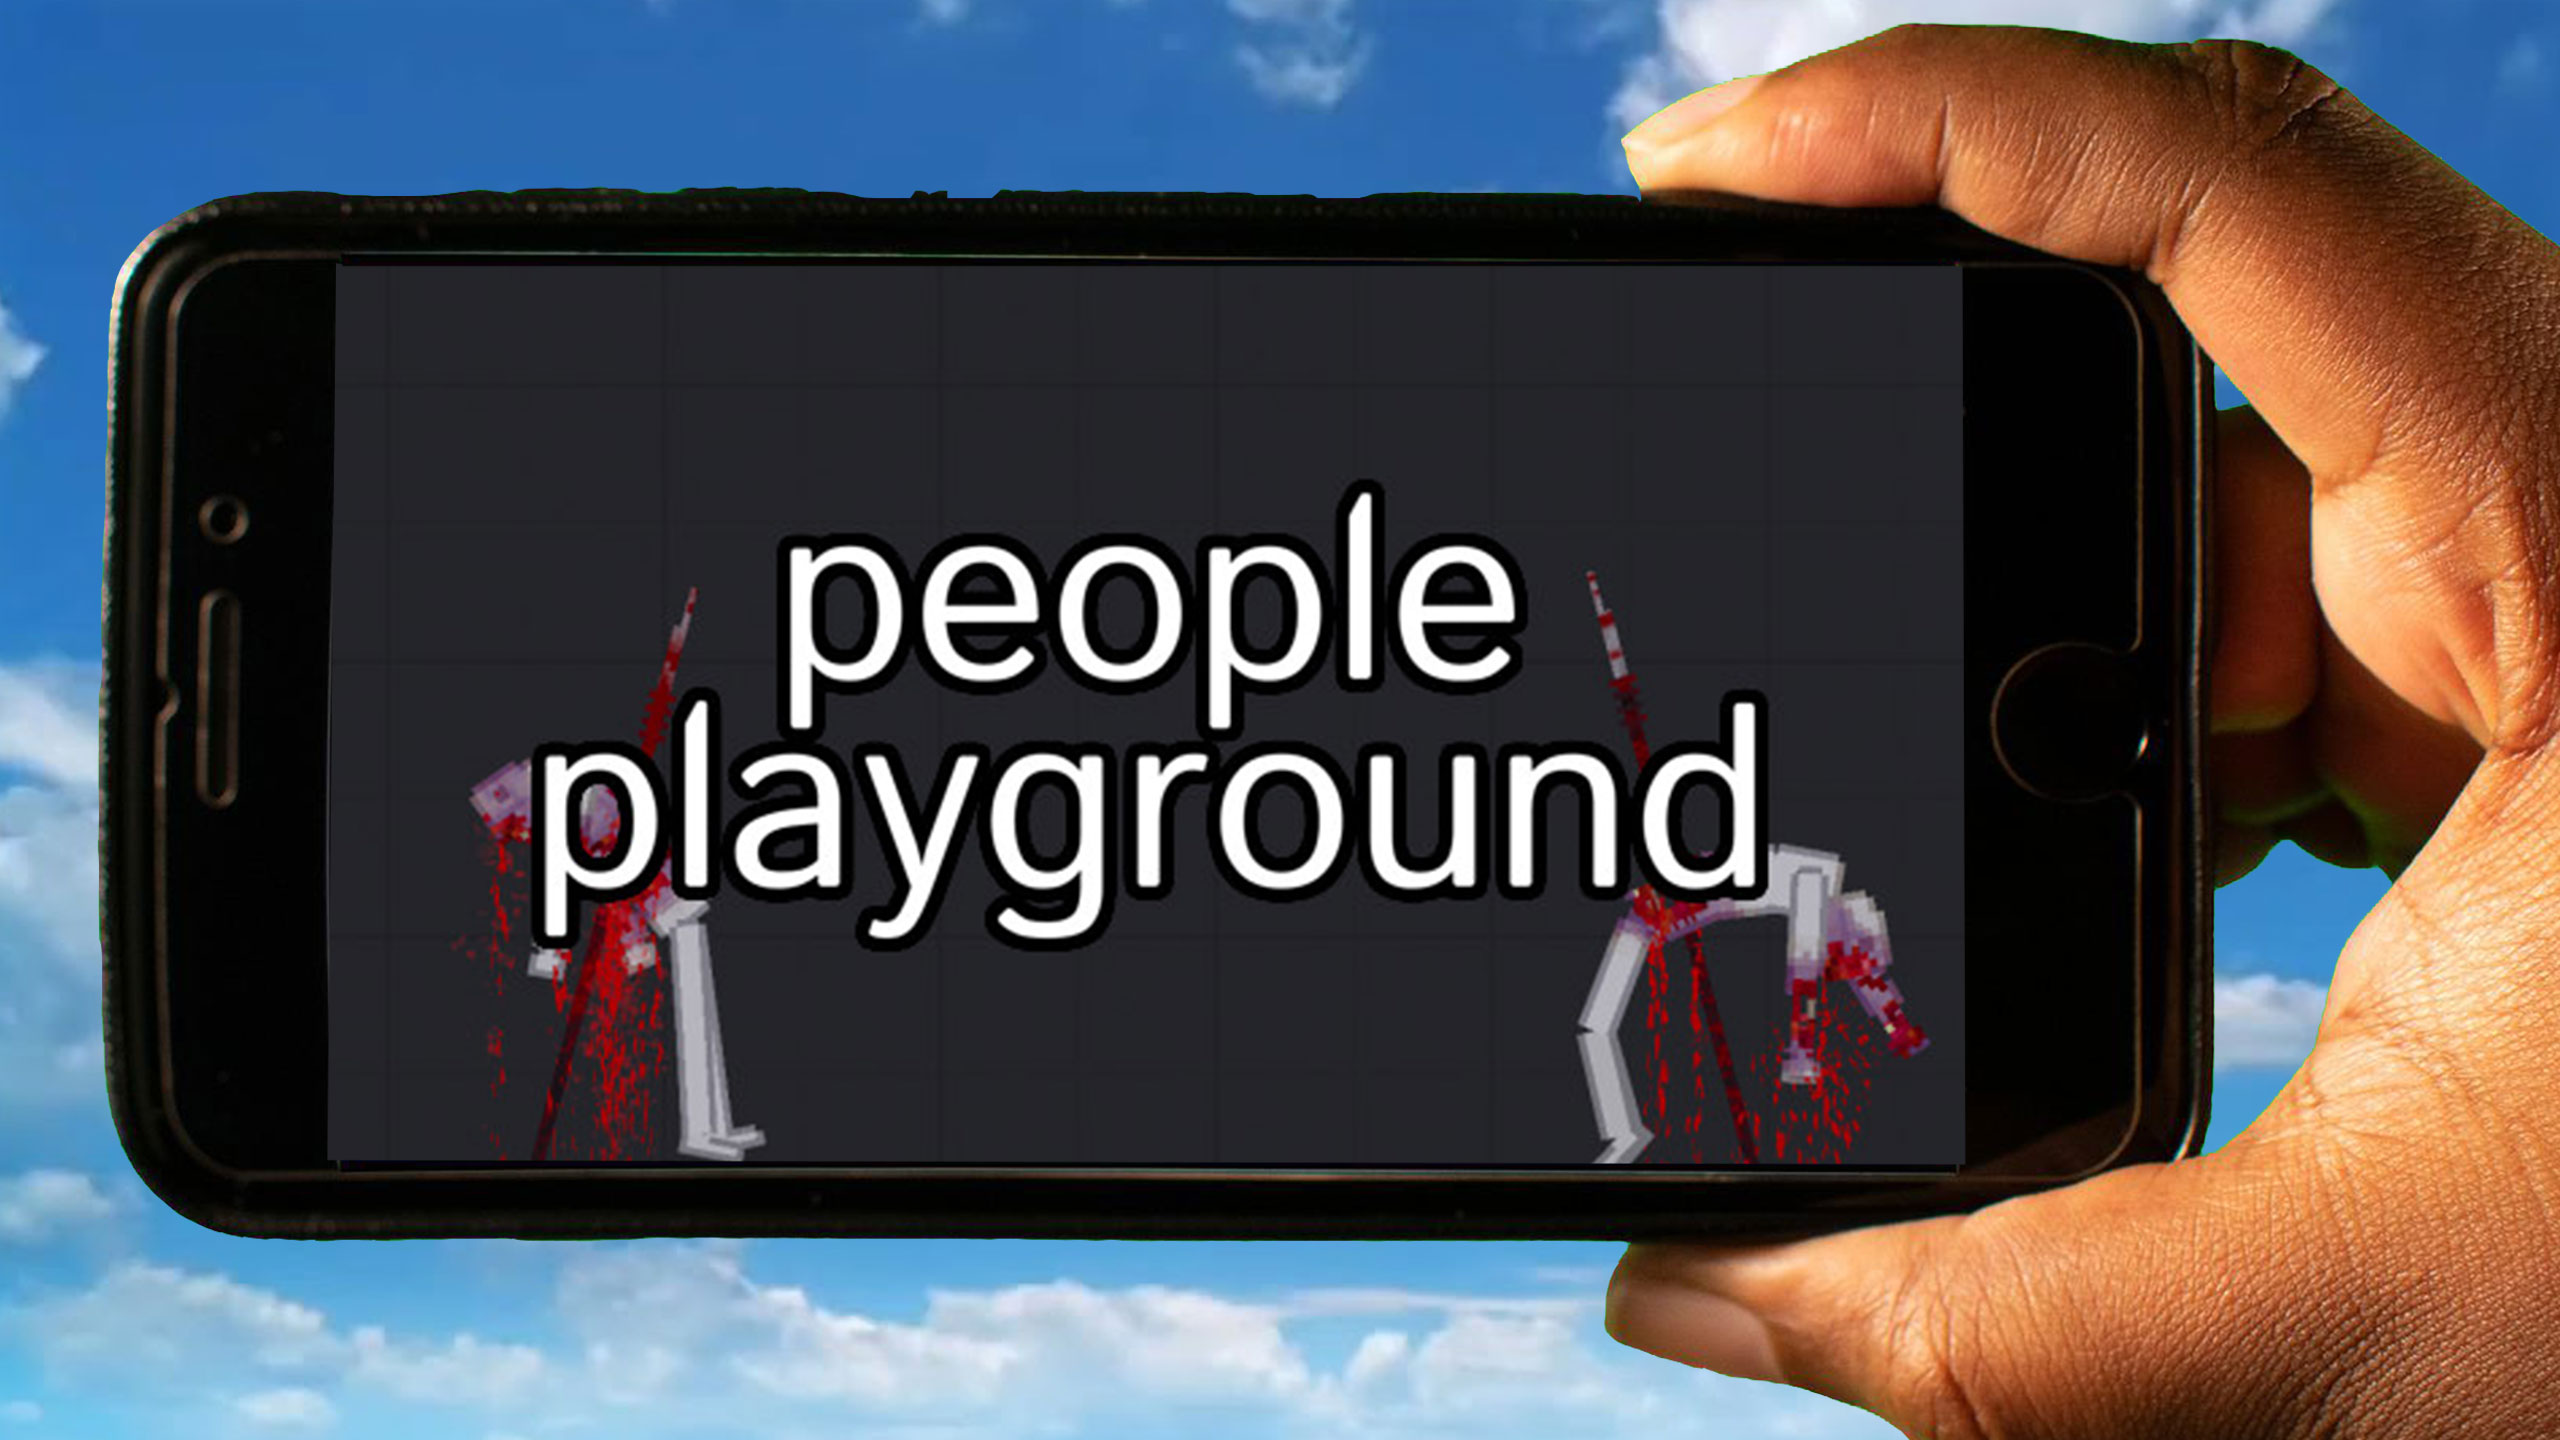 About: Walkthrough for people playground mobile (Google Play version)